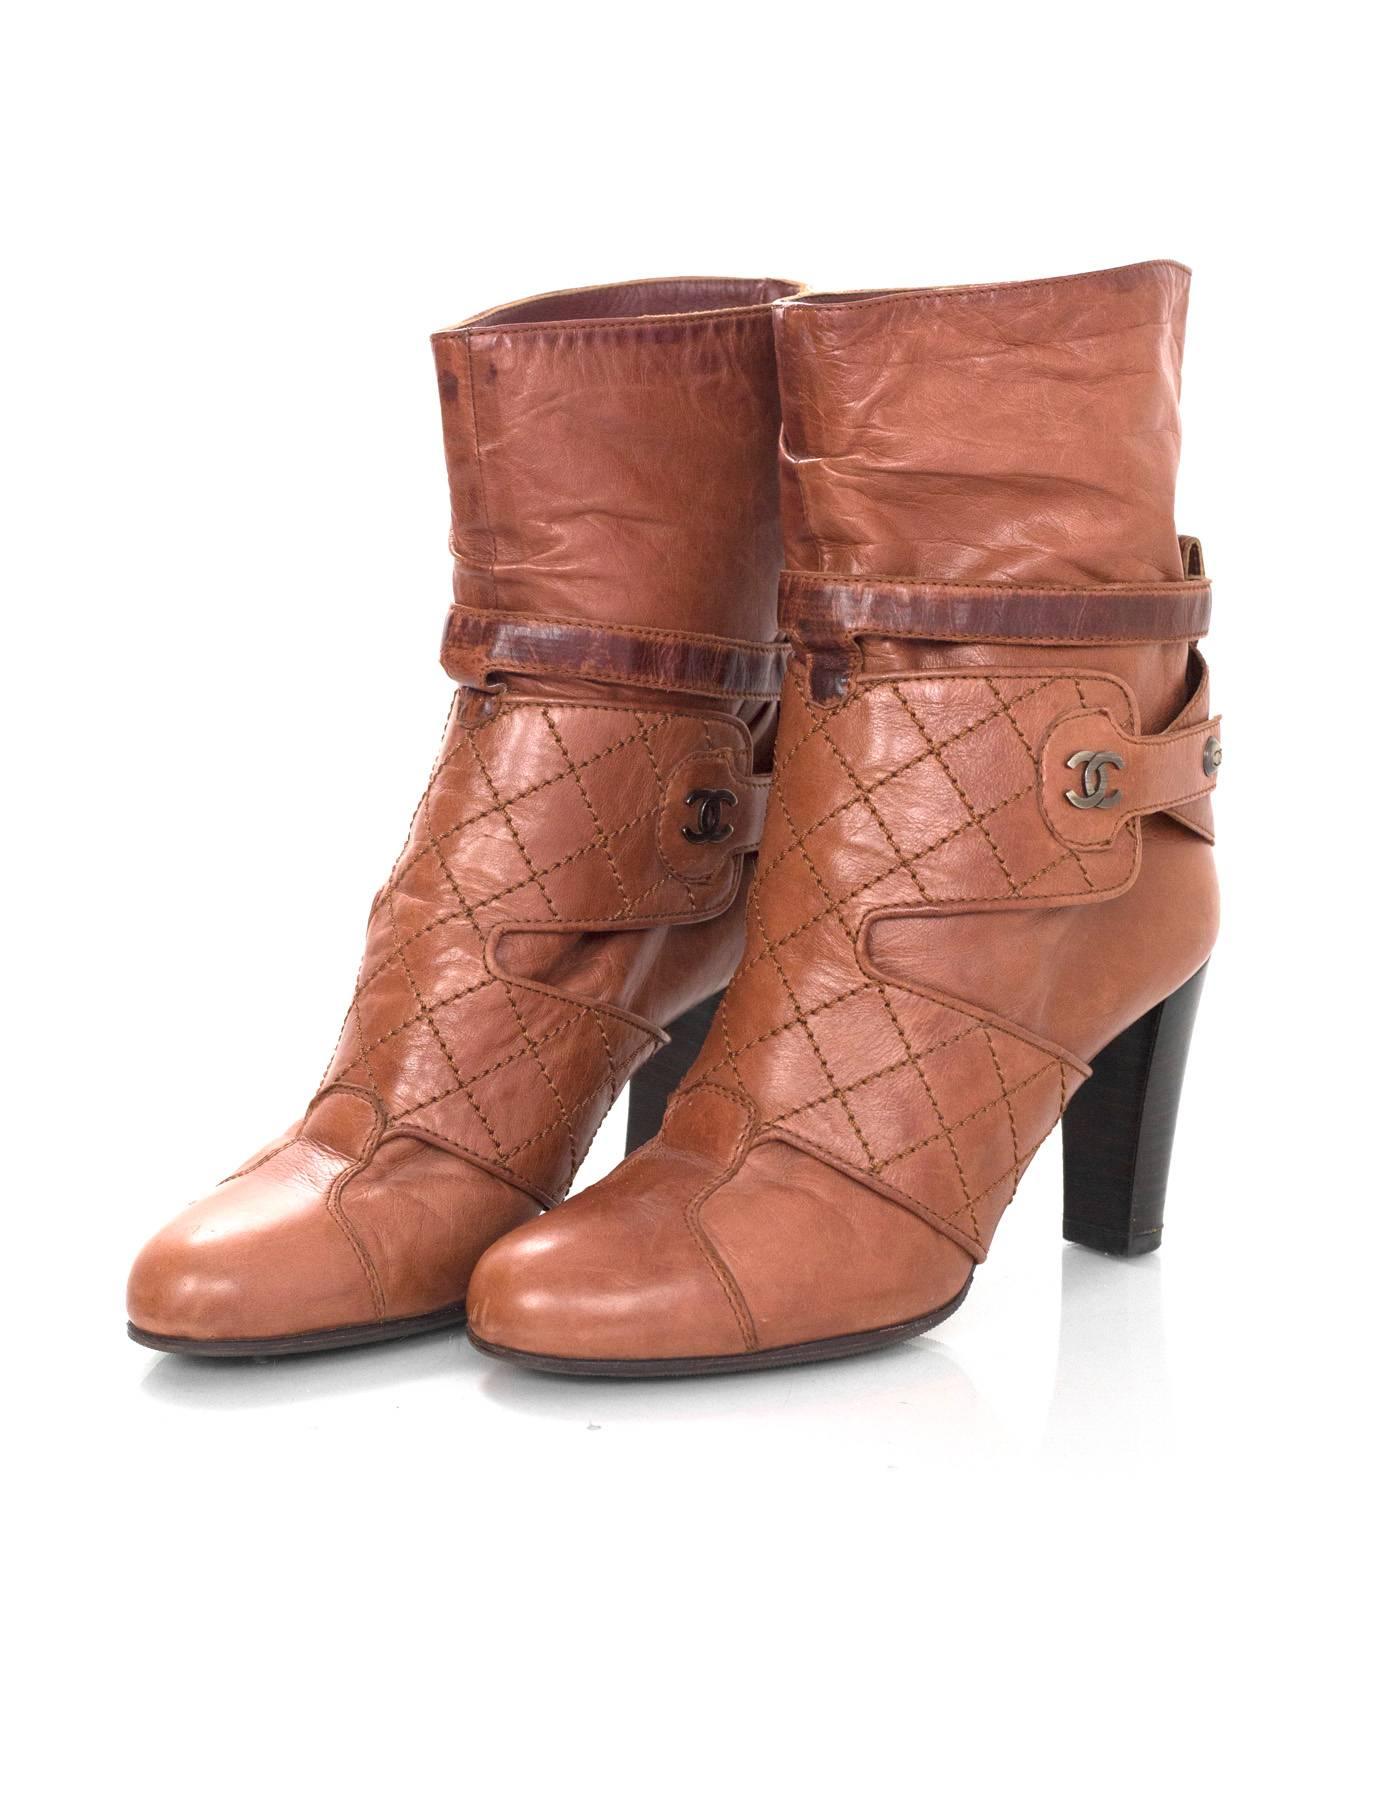 Brown Chanel Tan Leather Ankle Boots Sz 37